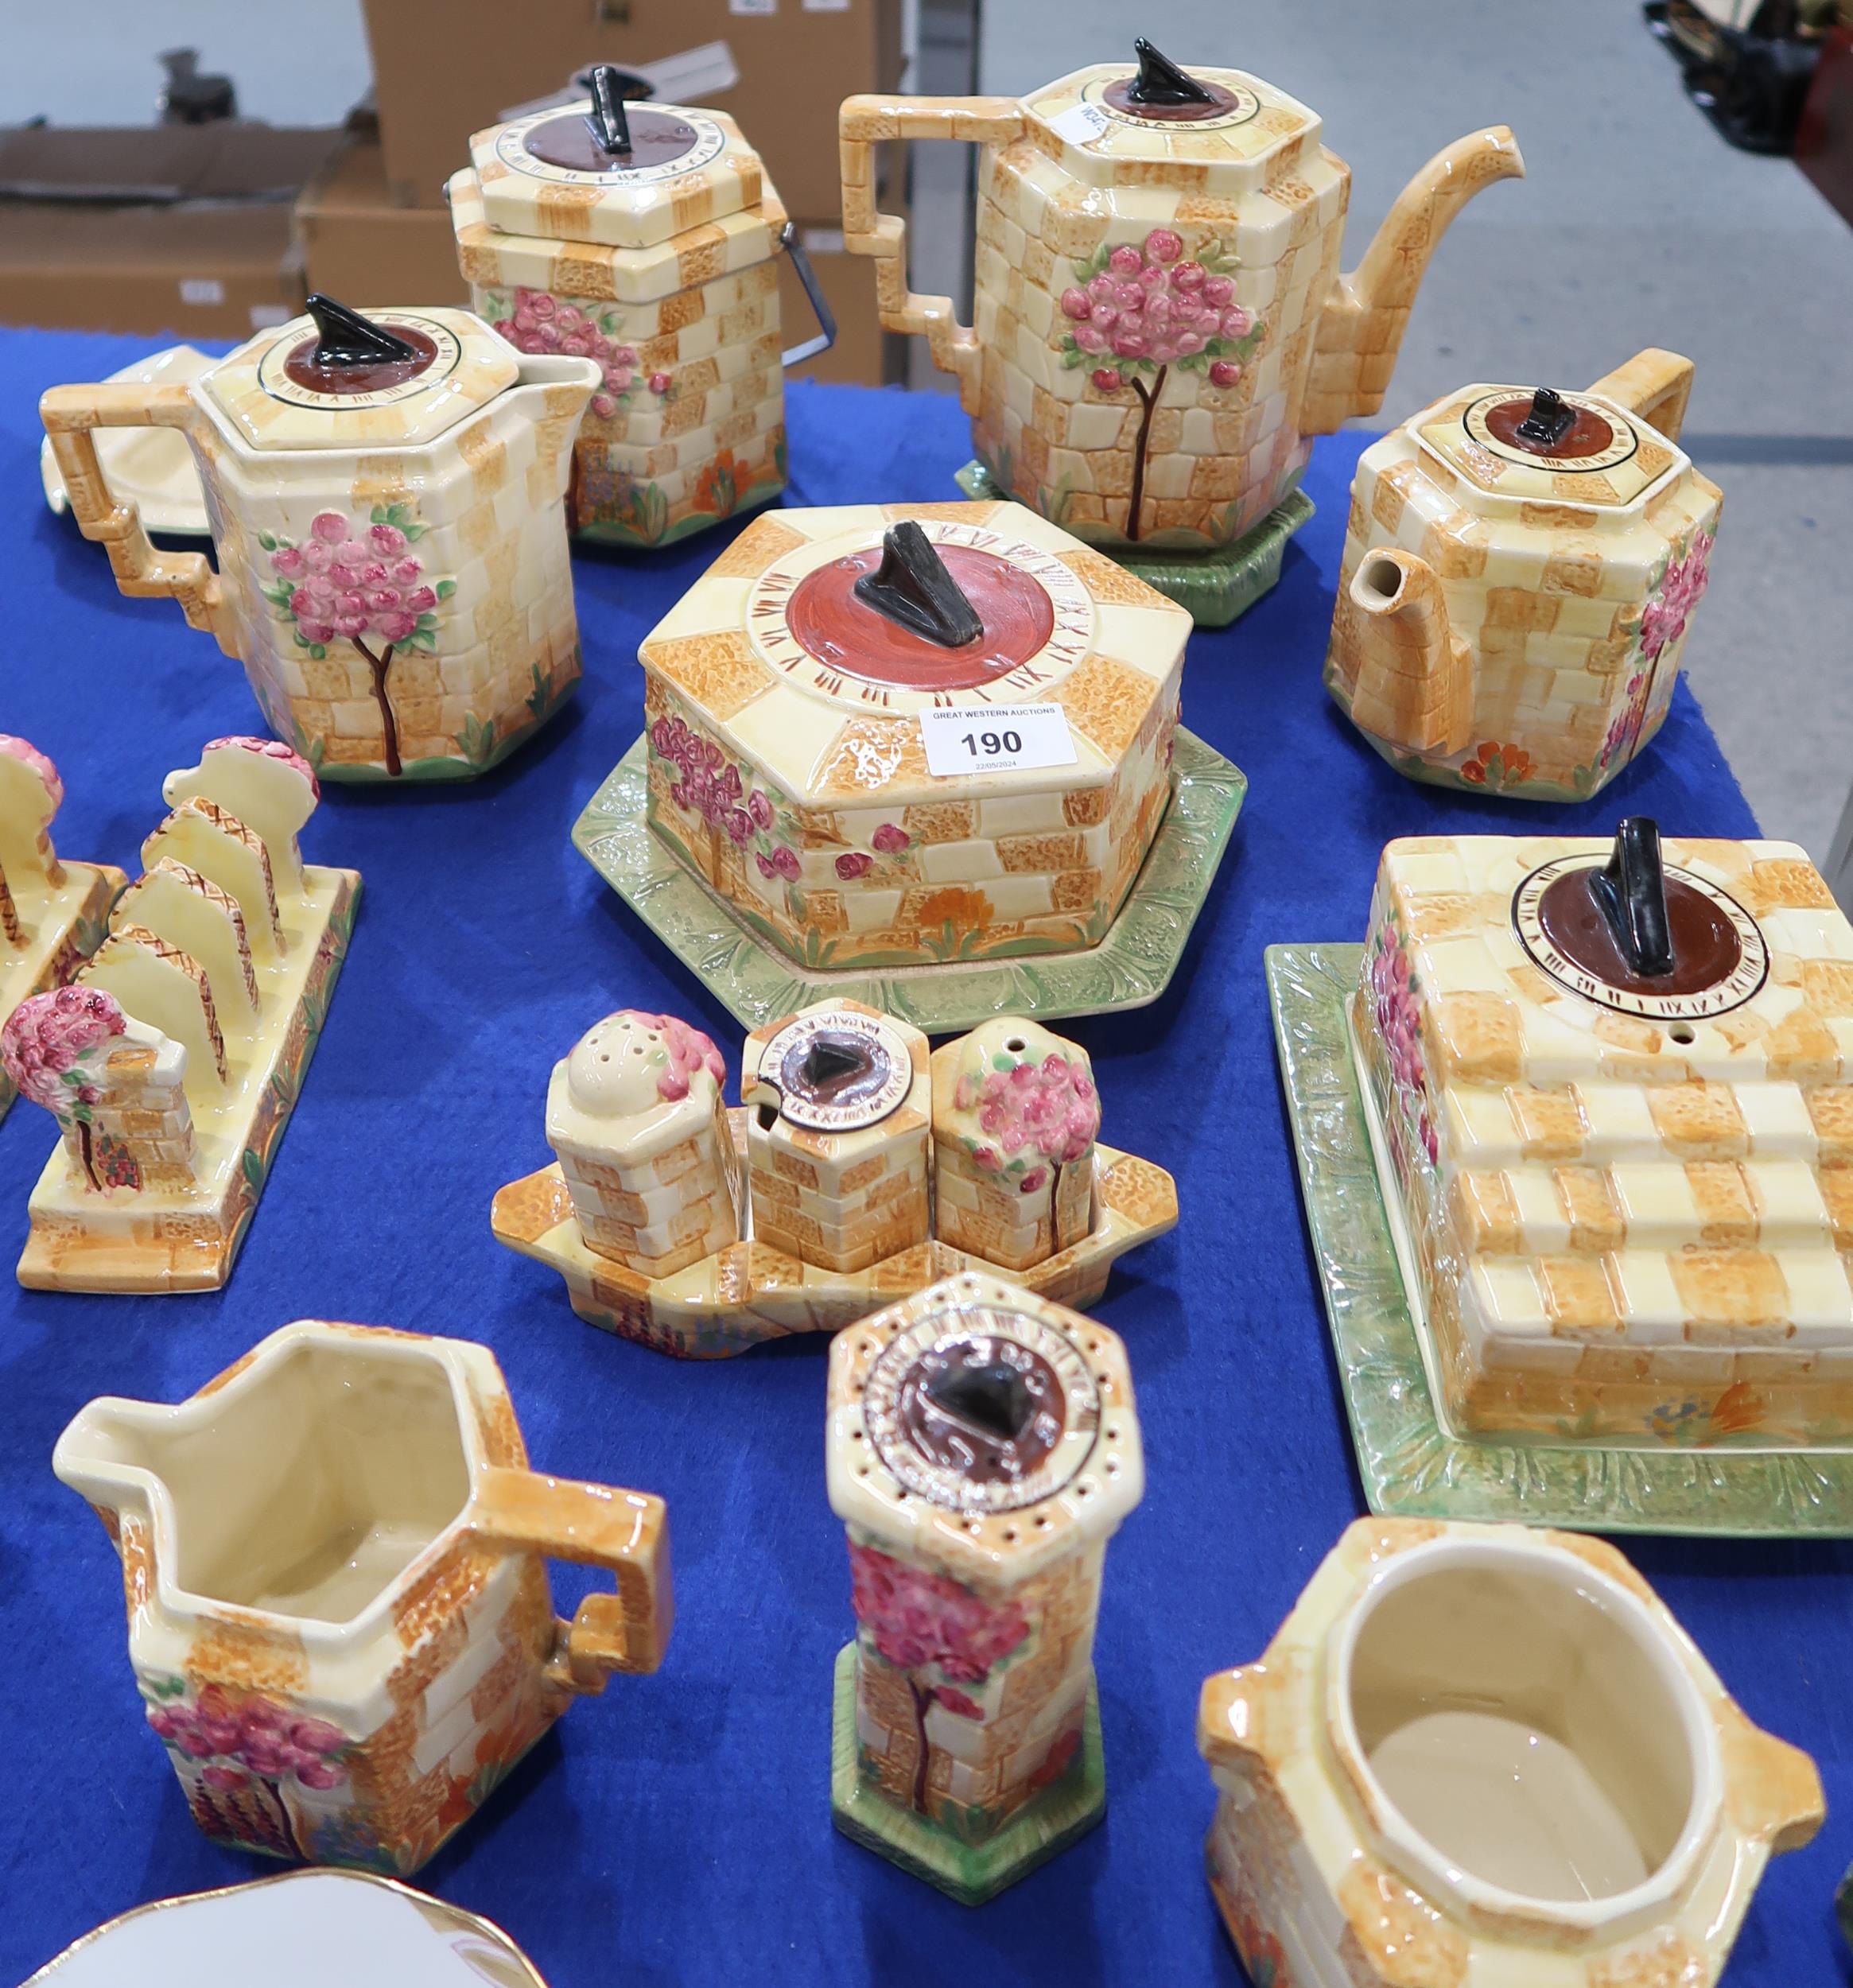 A collection of Beswick Sundial table wares including teapot, coffee pot, hot water pot, biscuit